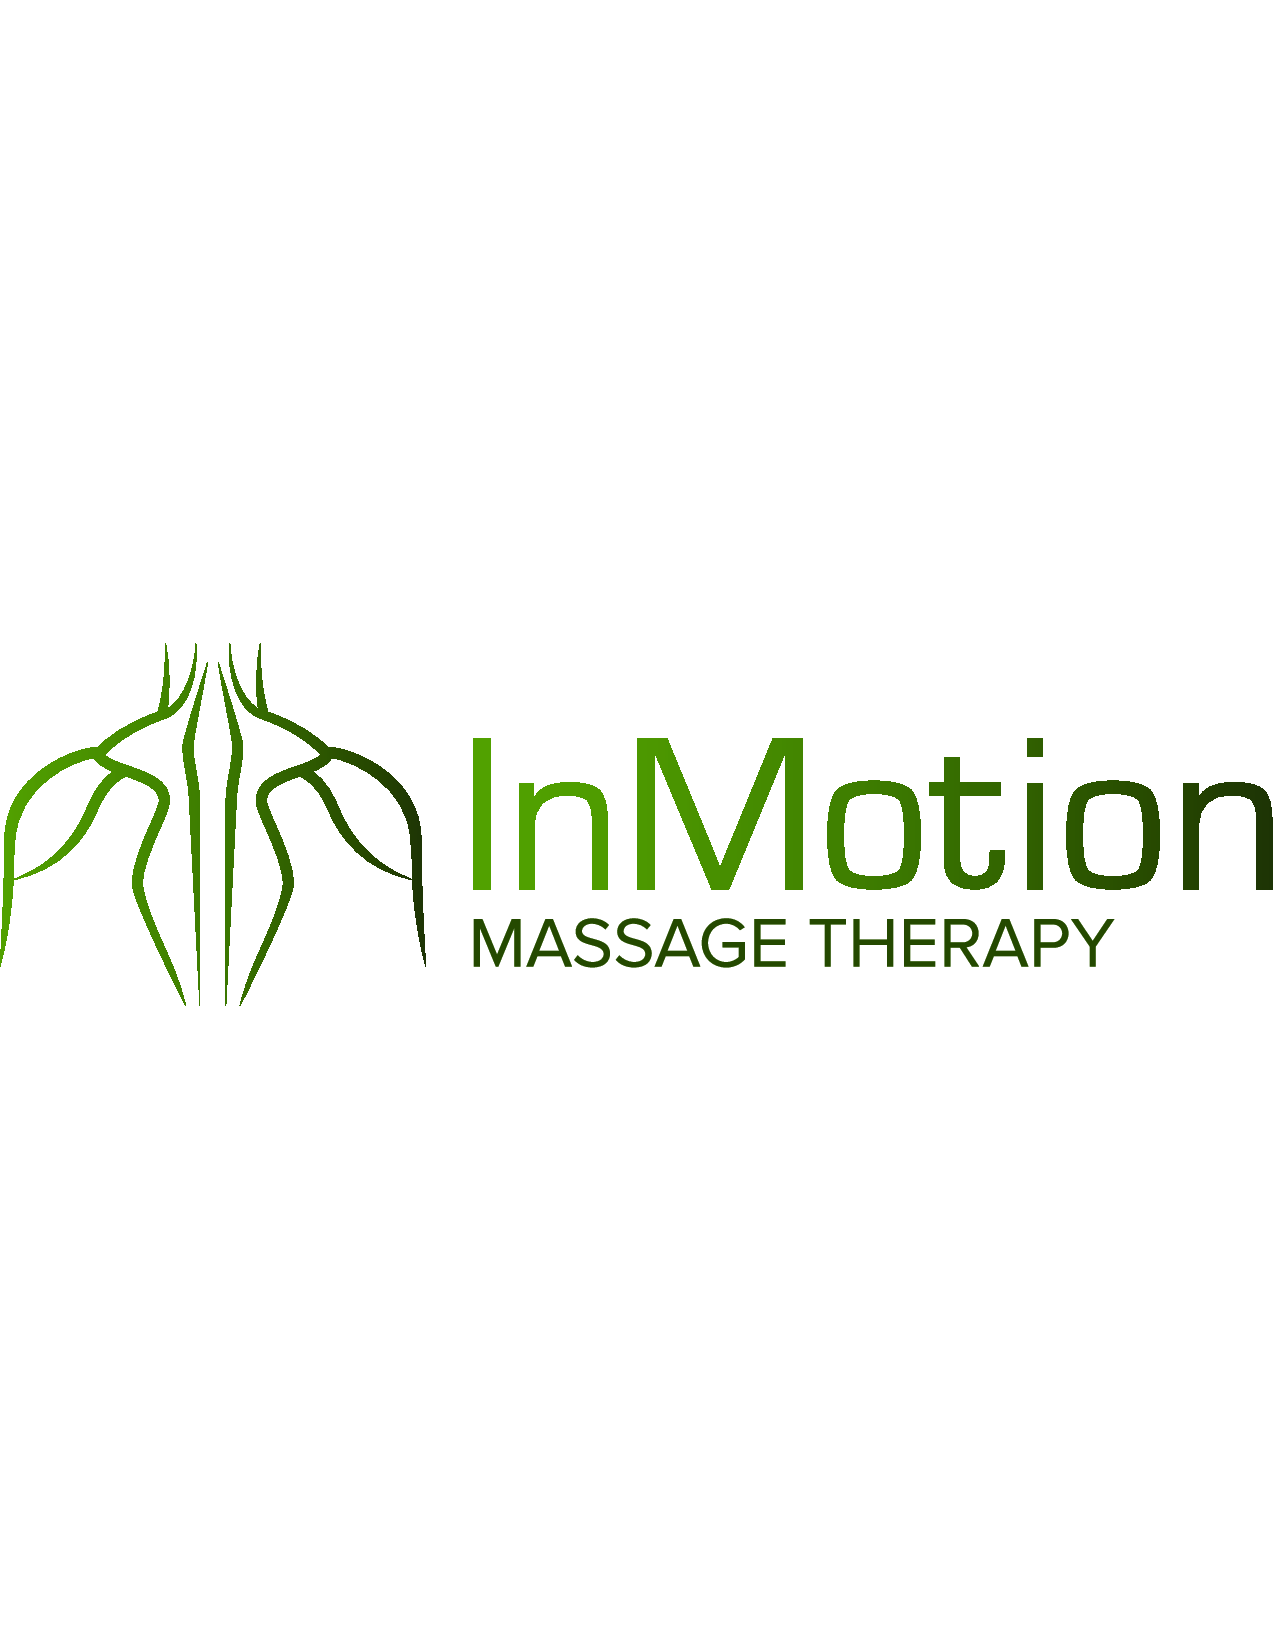 InMotion Massage Therapy